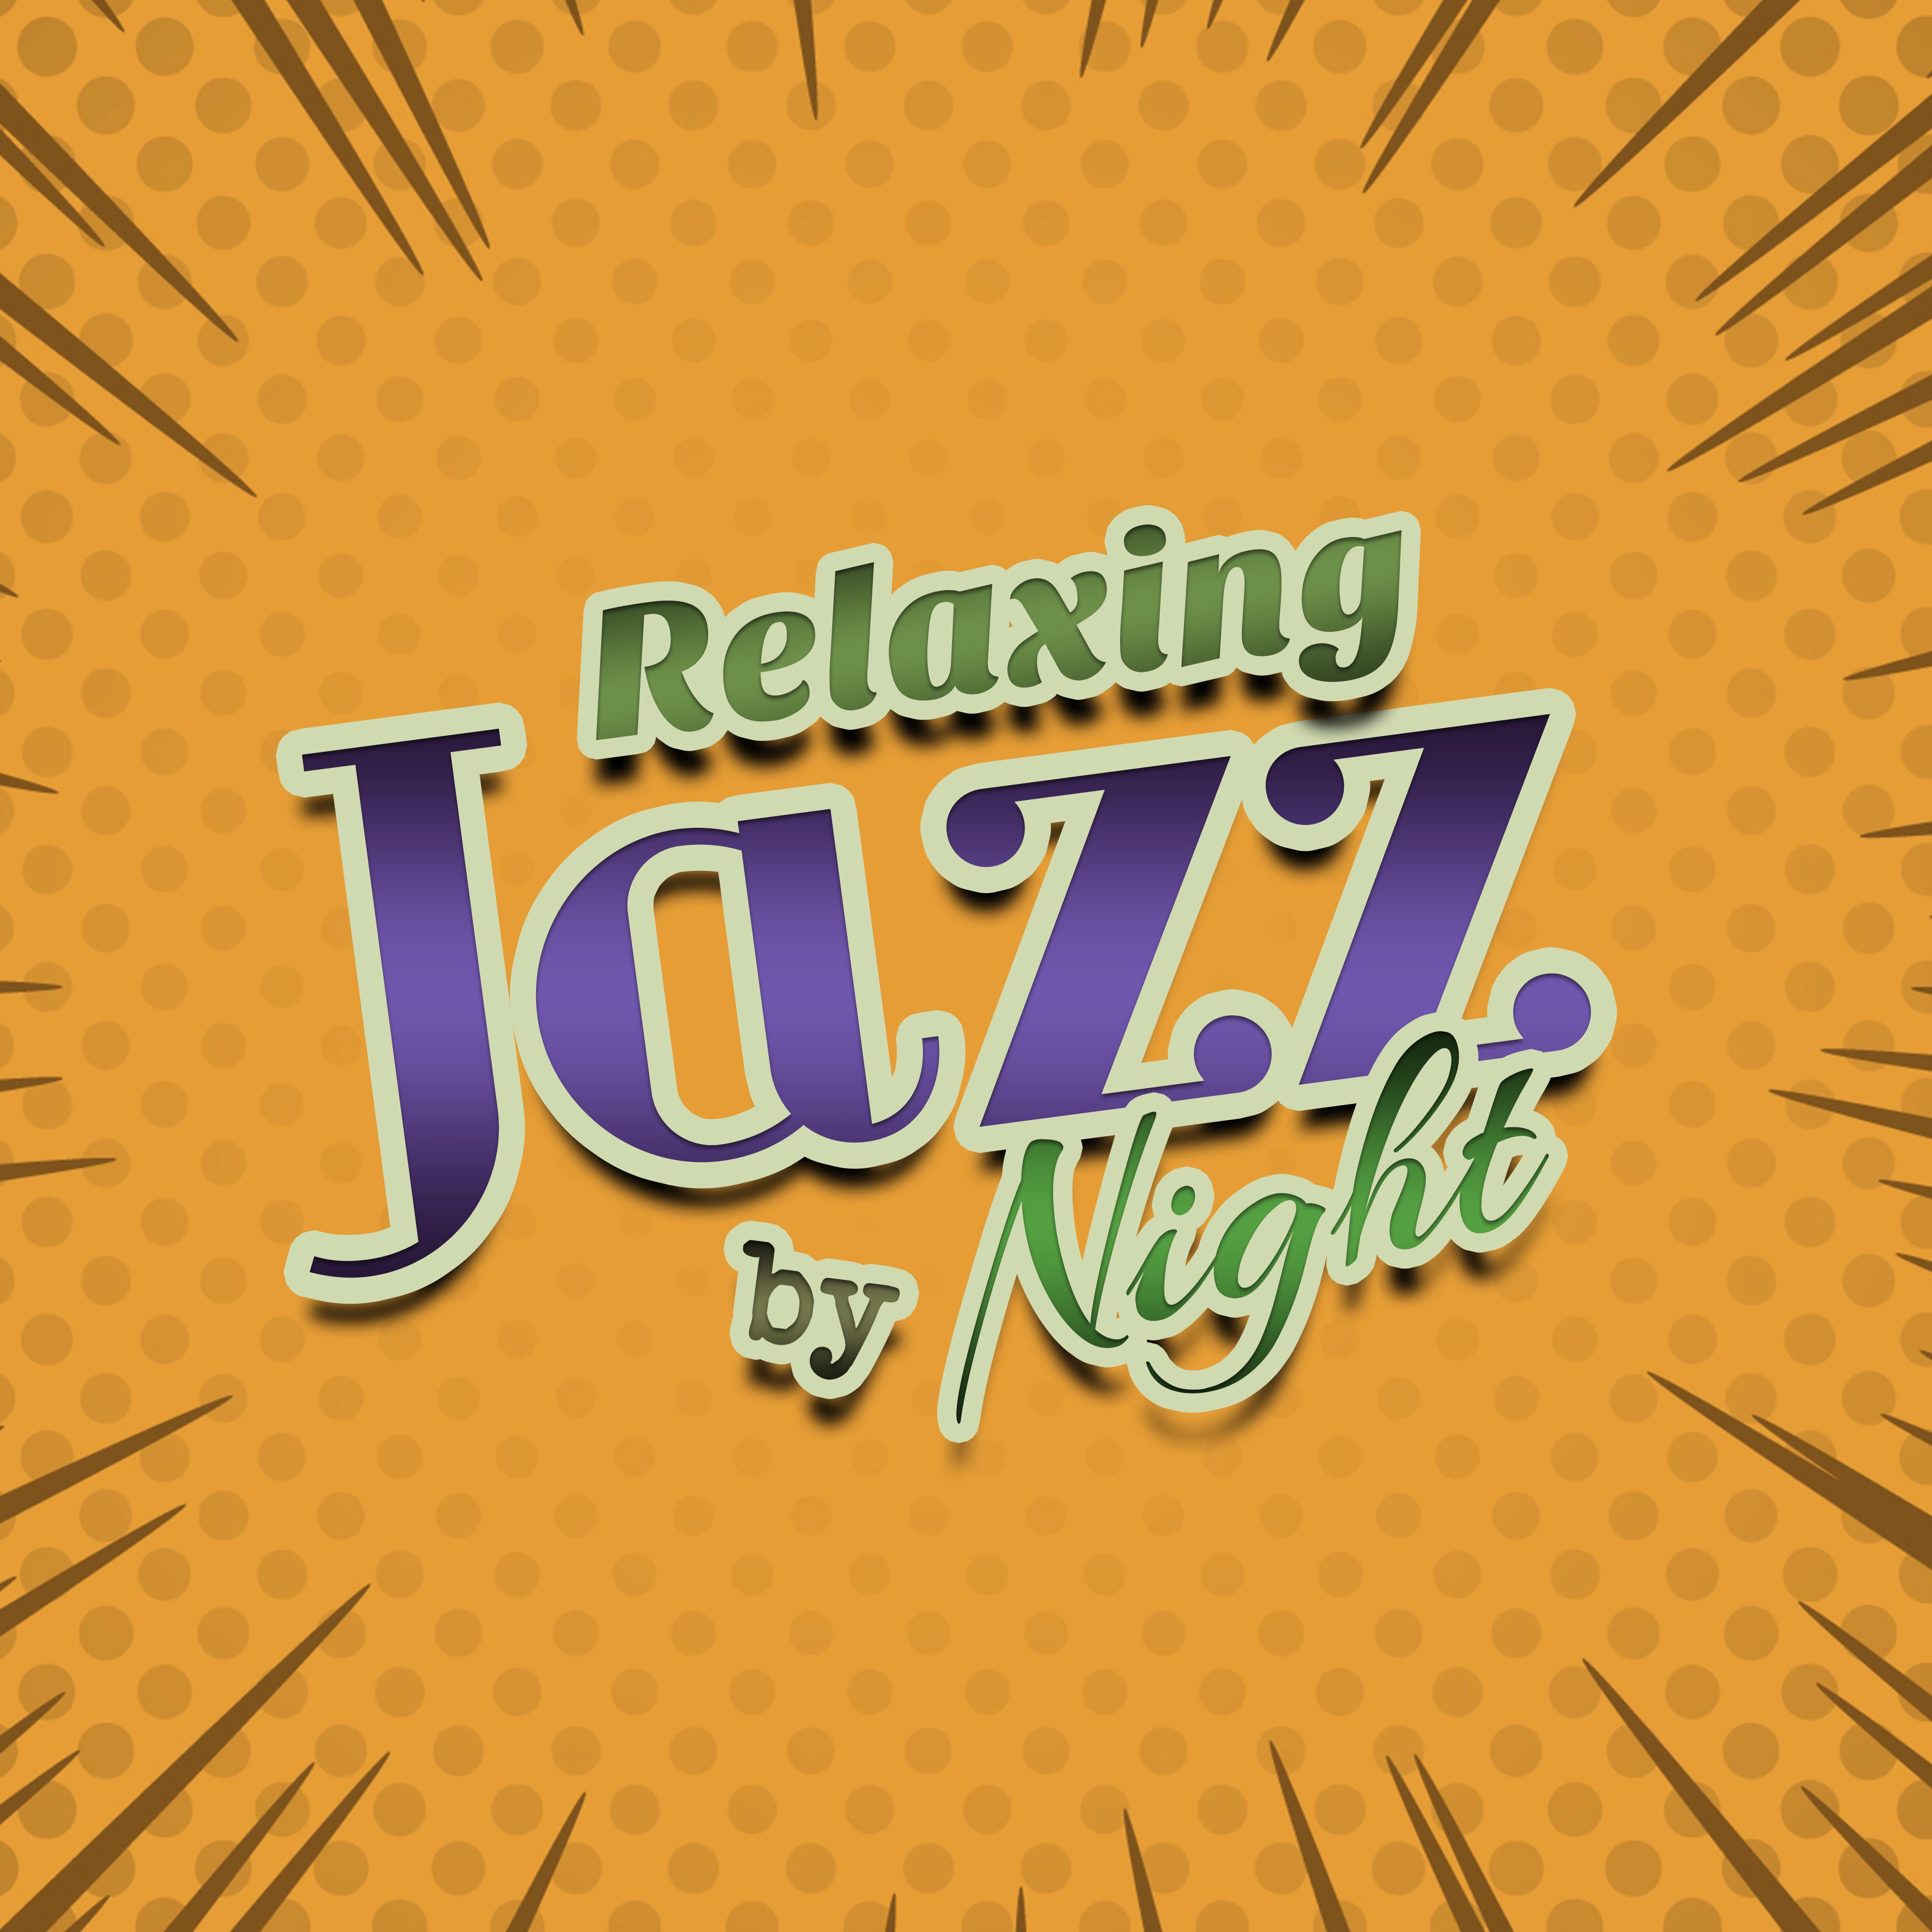 Relaxing Jazz by Night